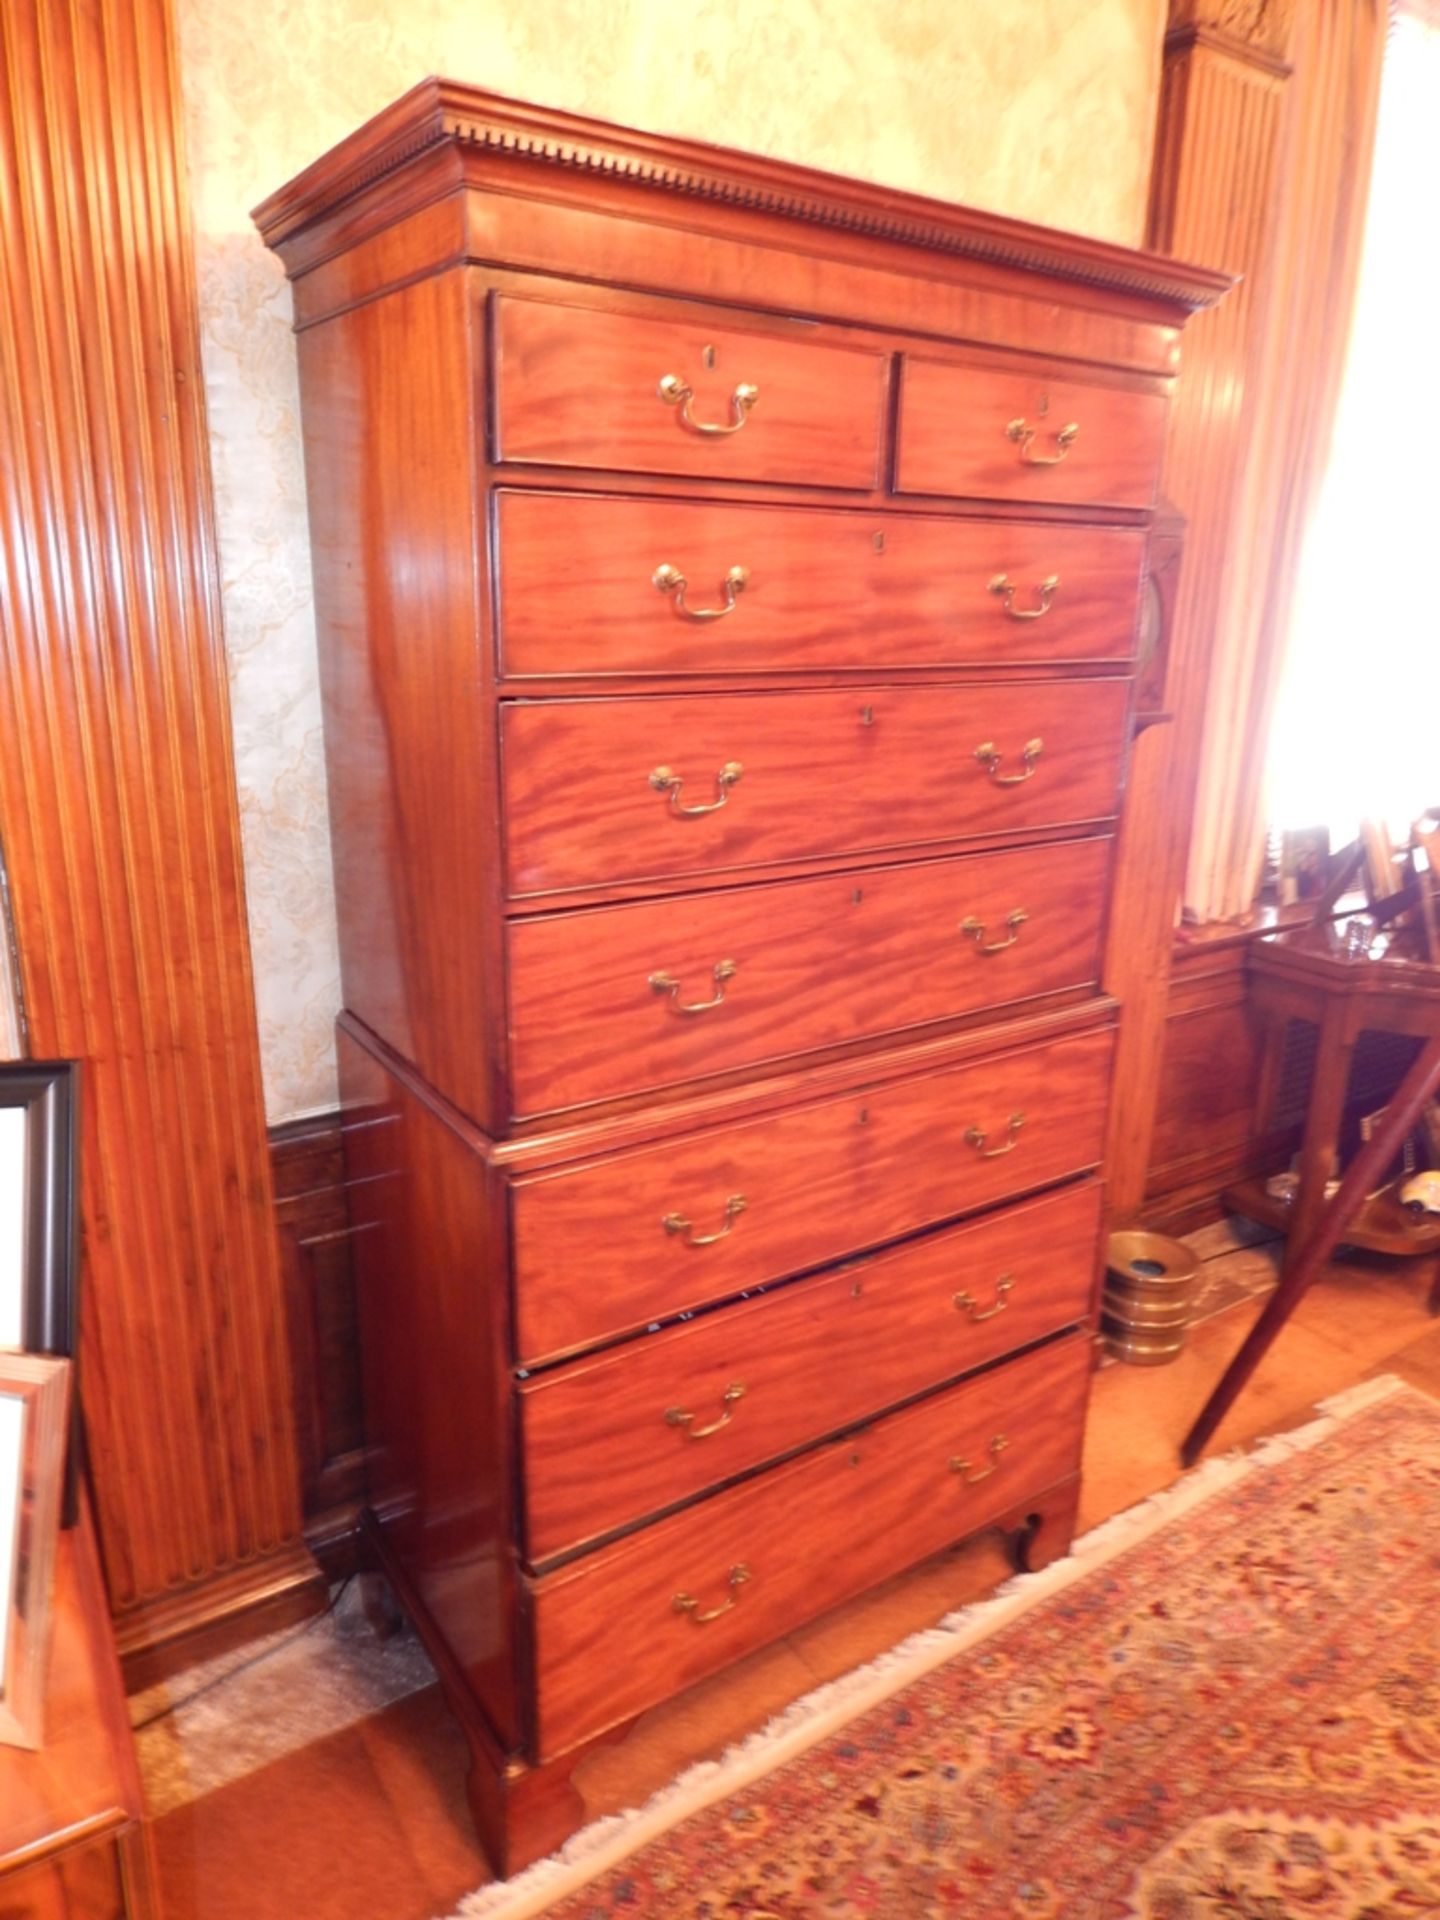 8 Drawer Mahogany Chest on Chest, Scrolled Bracket Feet, Overcoated Finish, circa 1820, (6'5") - Image 2 of 5